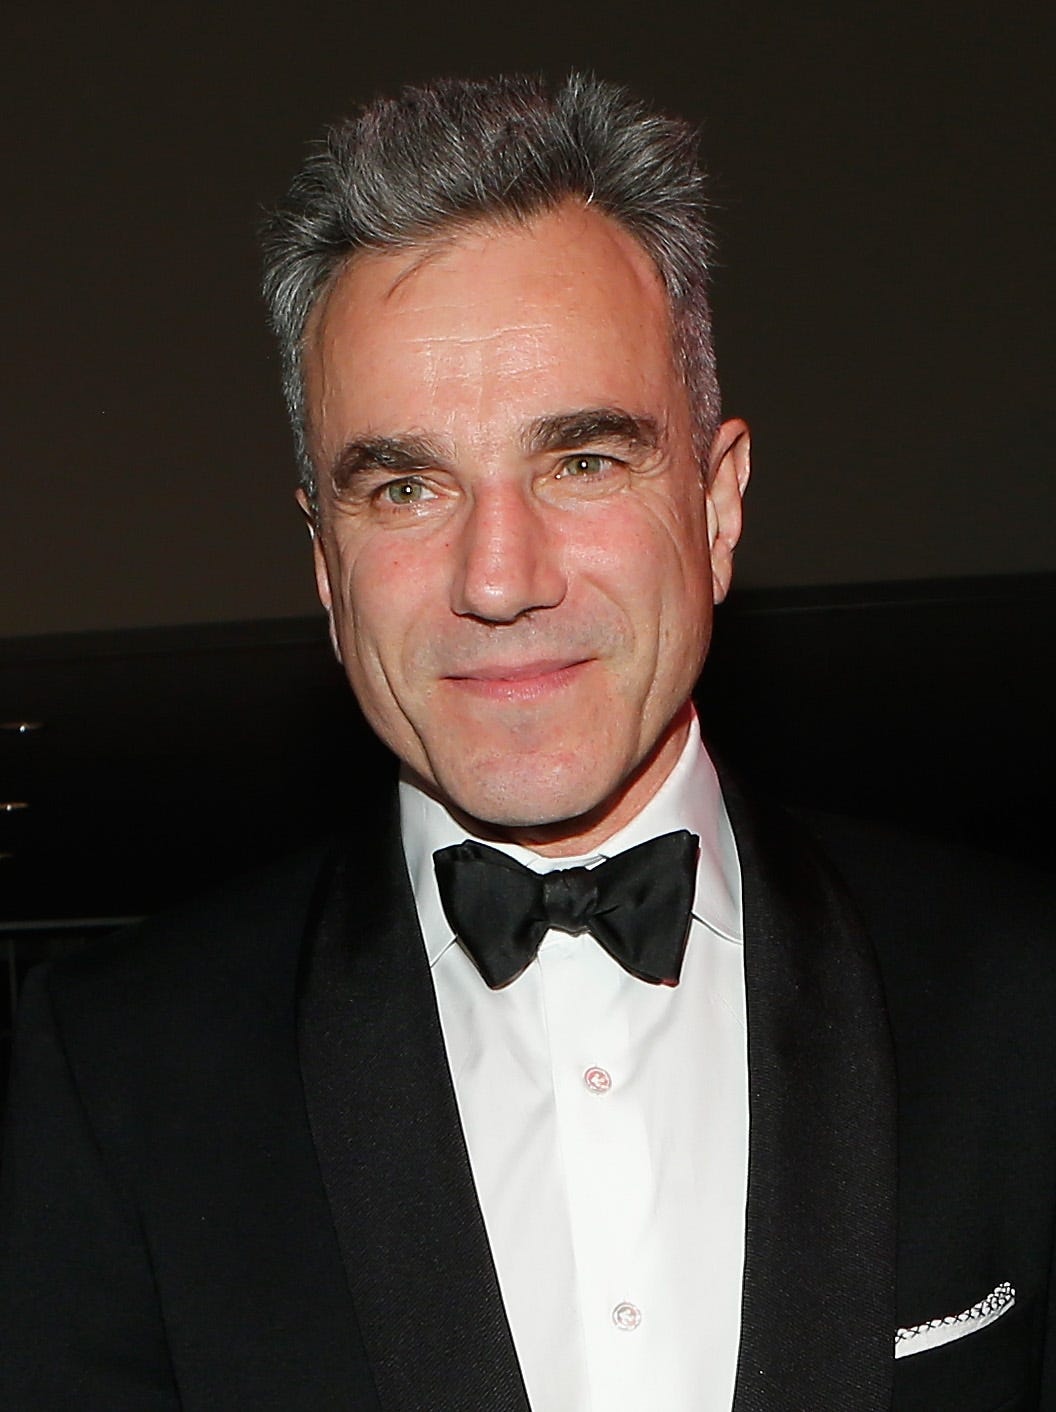 Daniel Day-Lewis is quitting acting for good